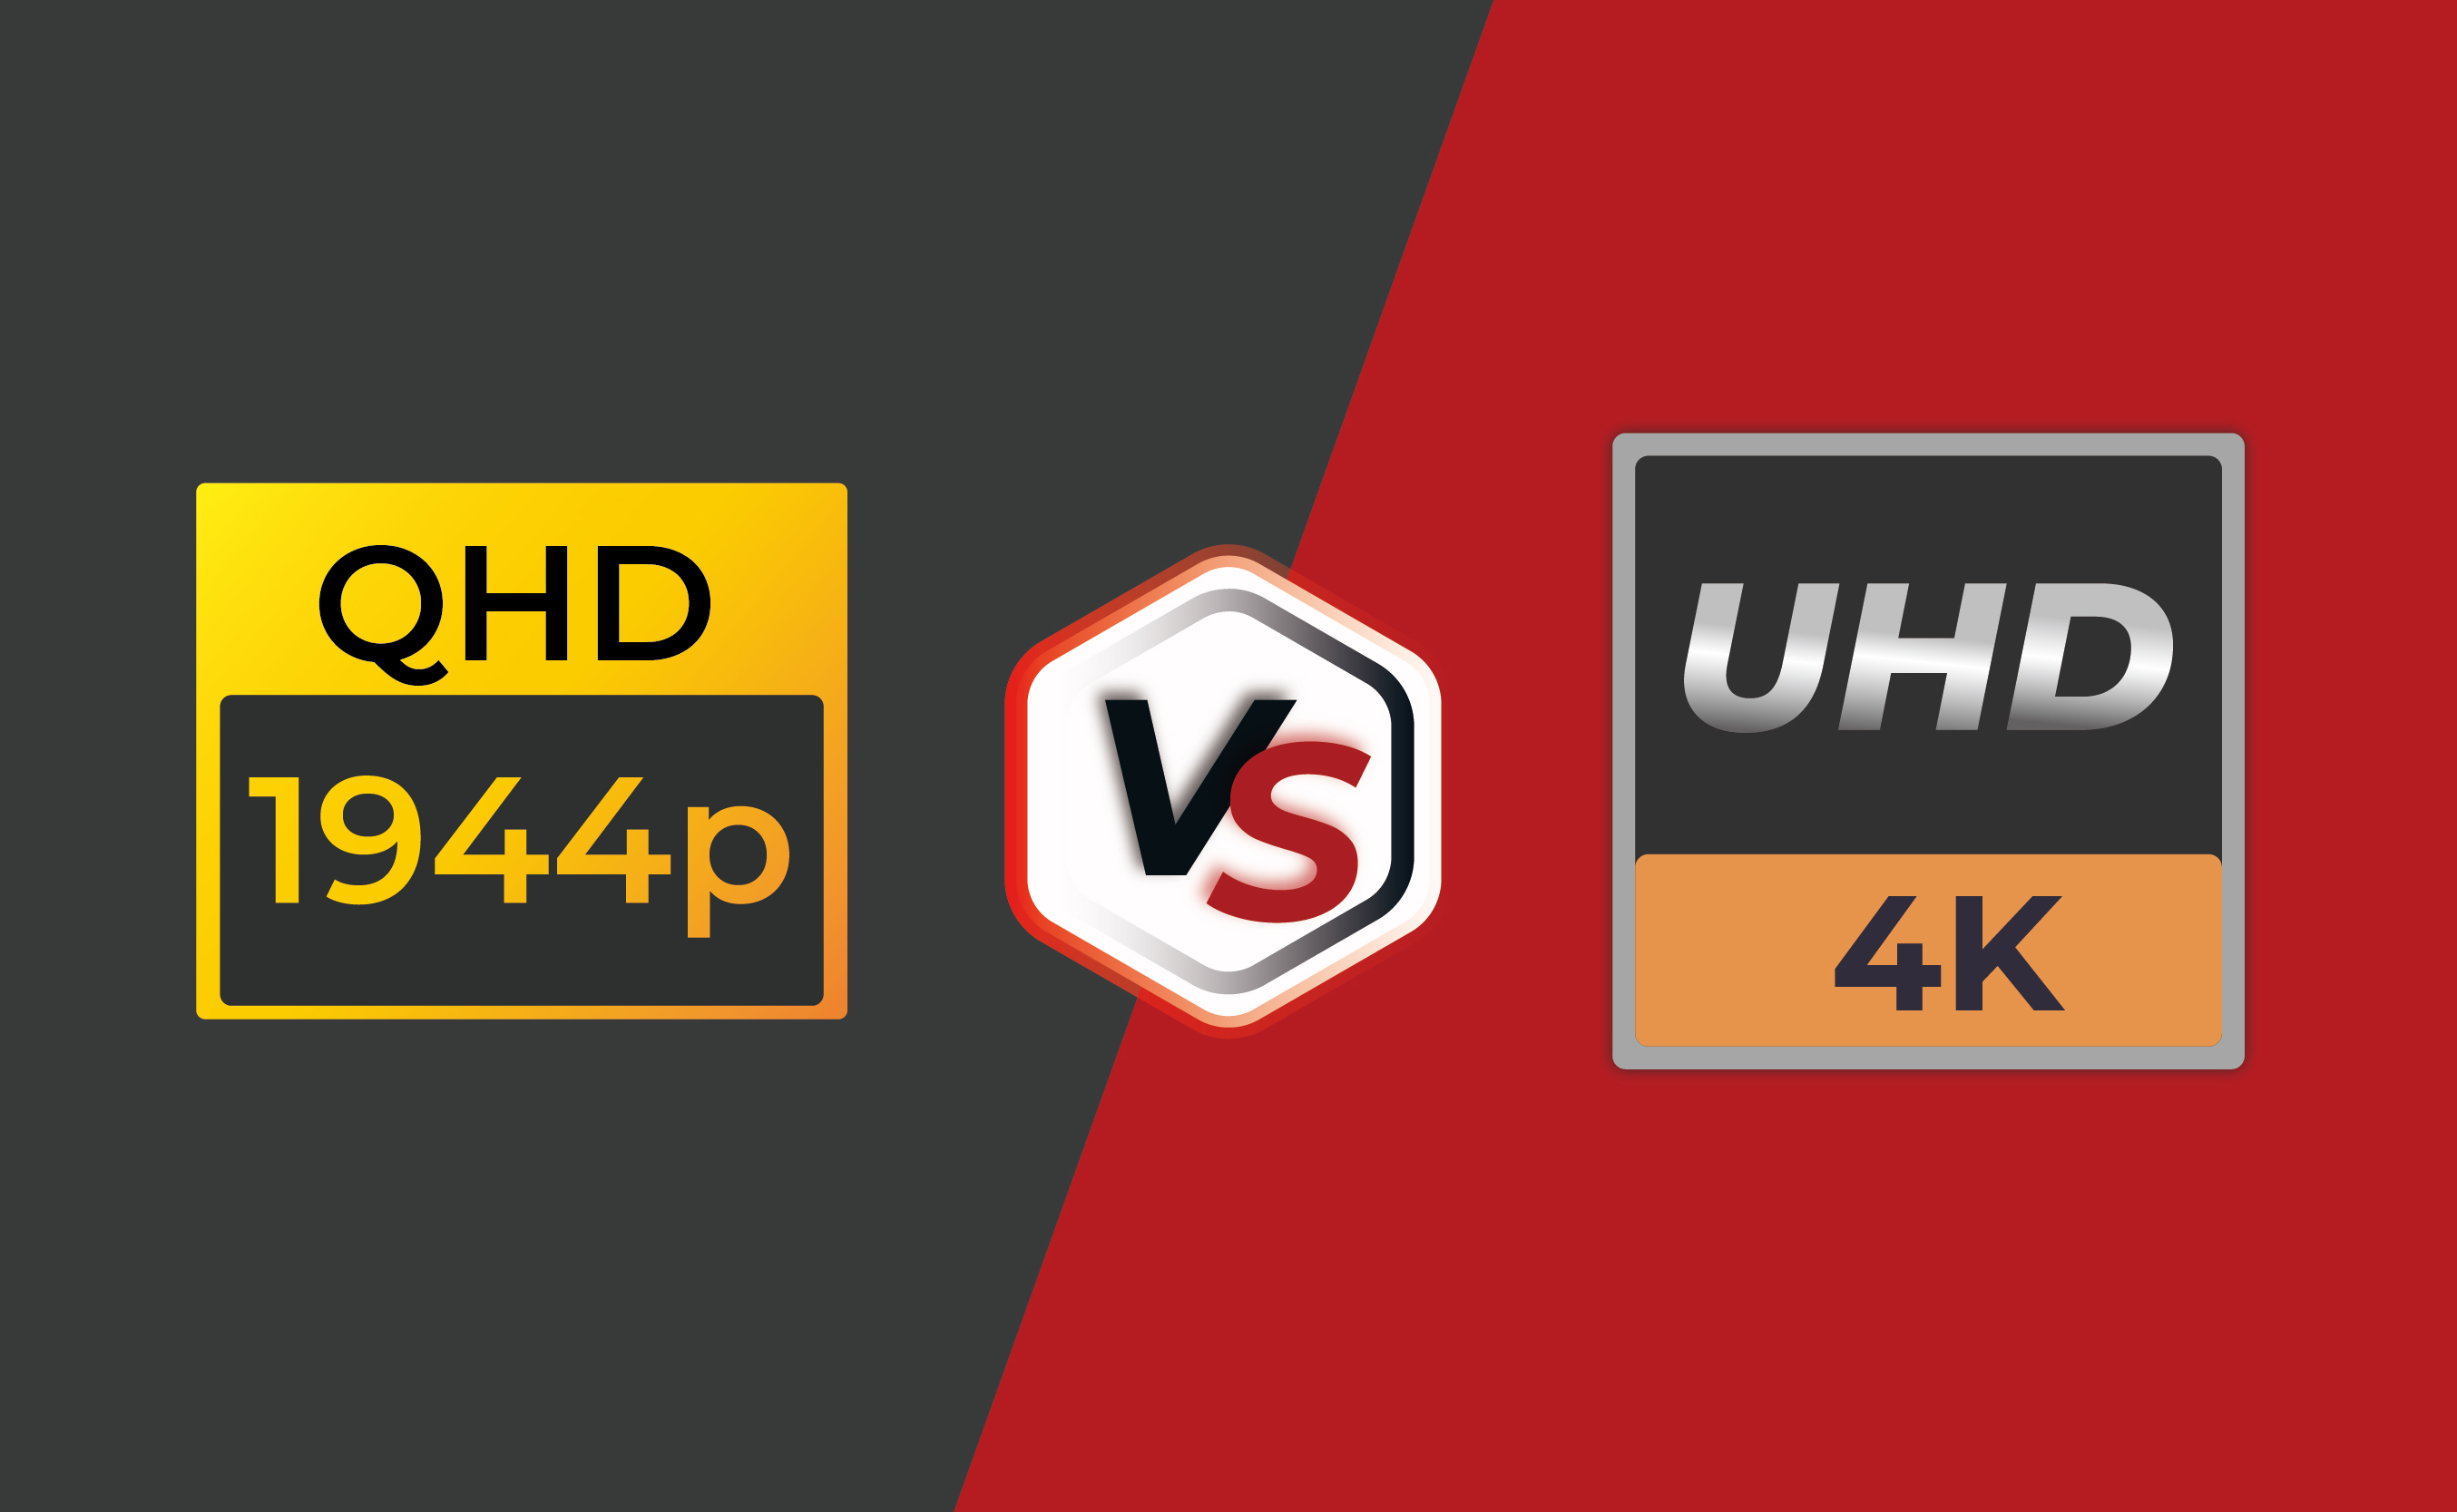 1944p vs 4K: Which Resolution is Better？